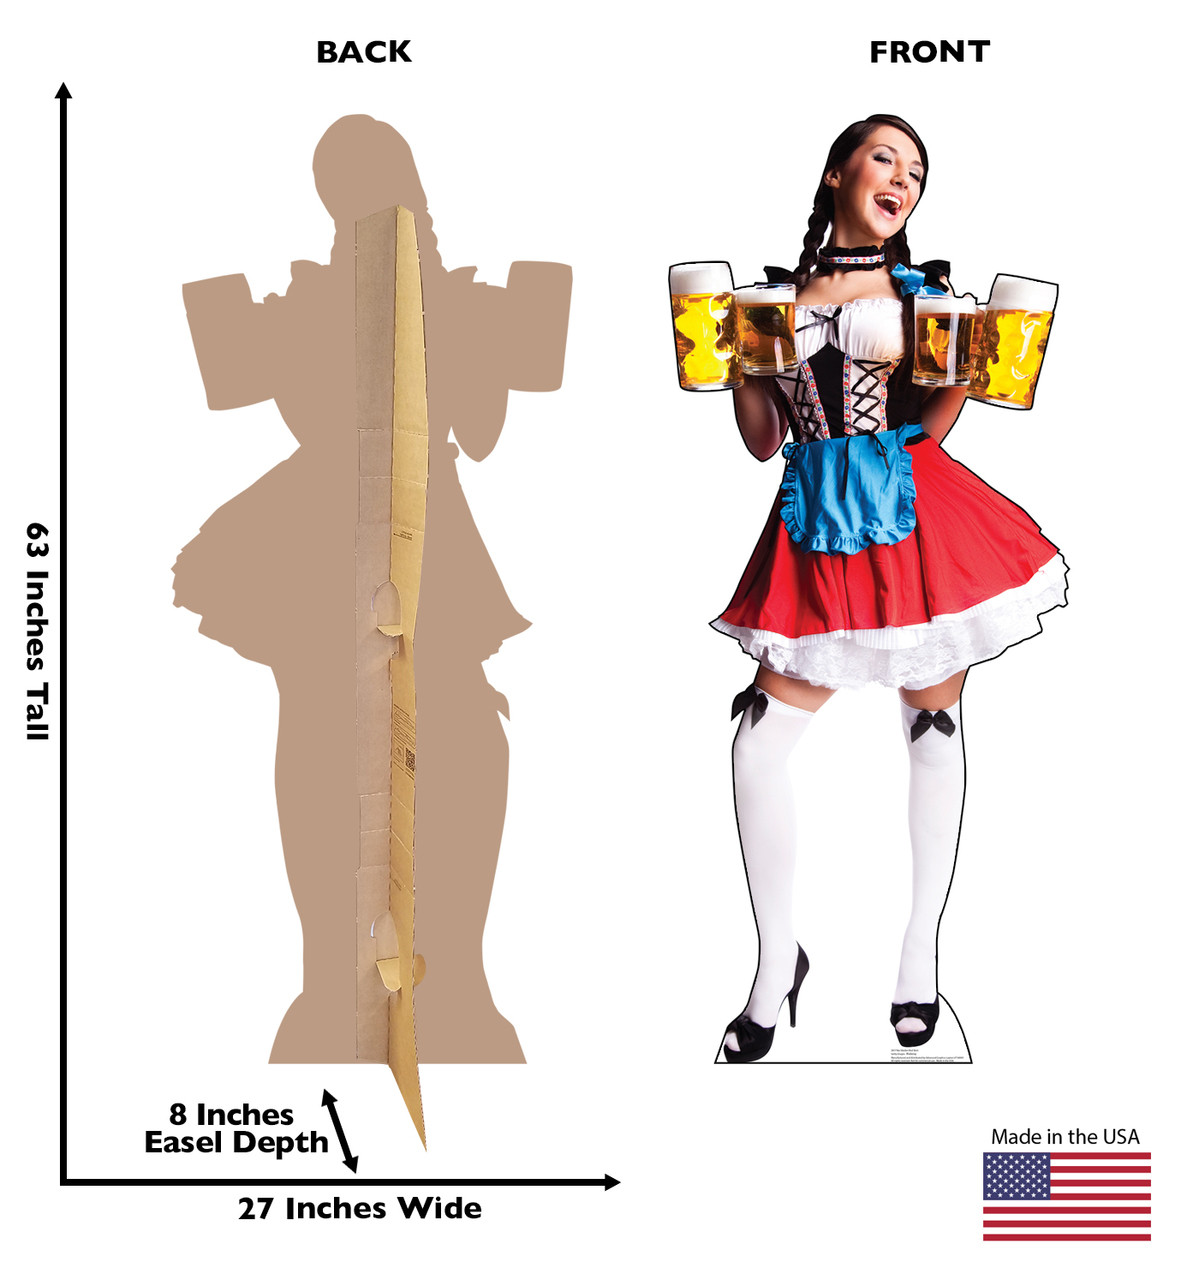 Life-size cardboard standee of a Bar Maiden in Red Skirt with back and front dimensions.